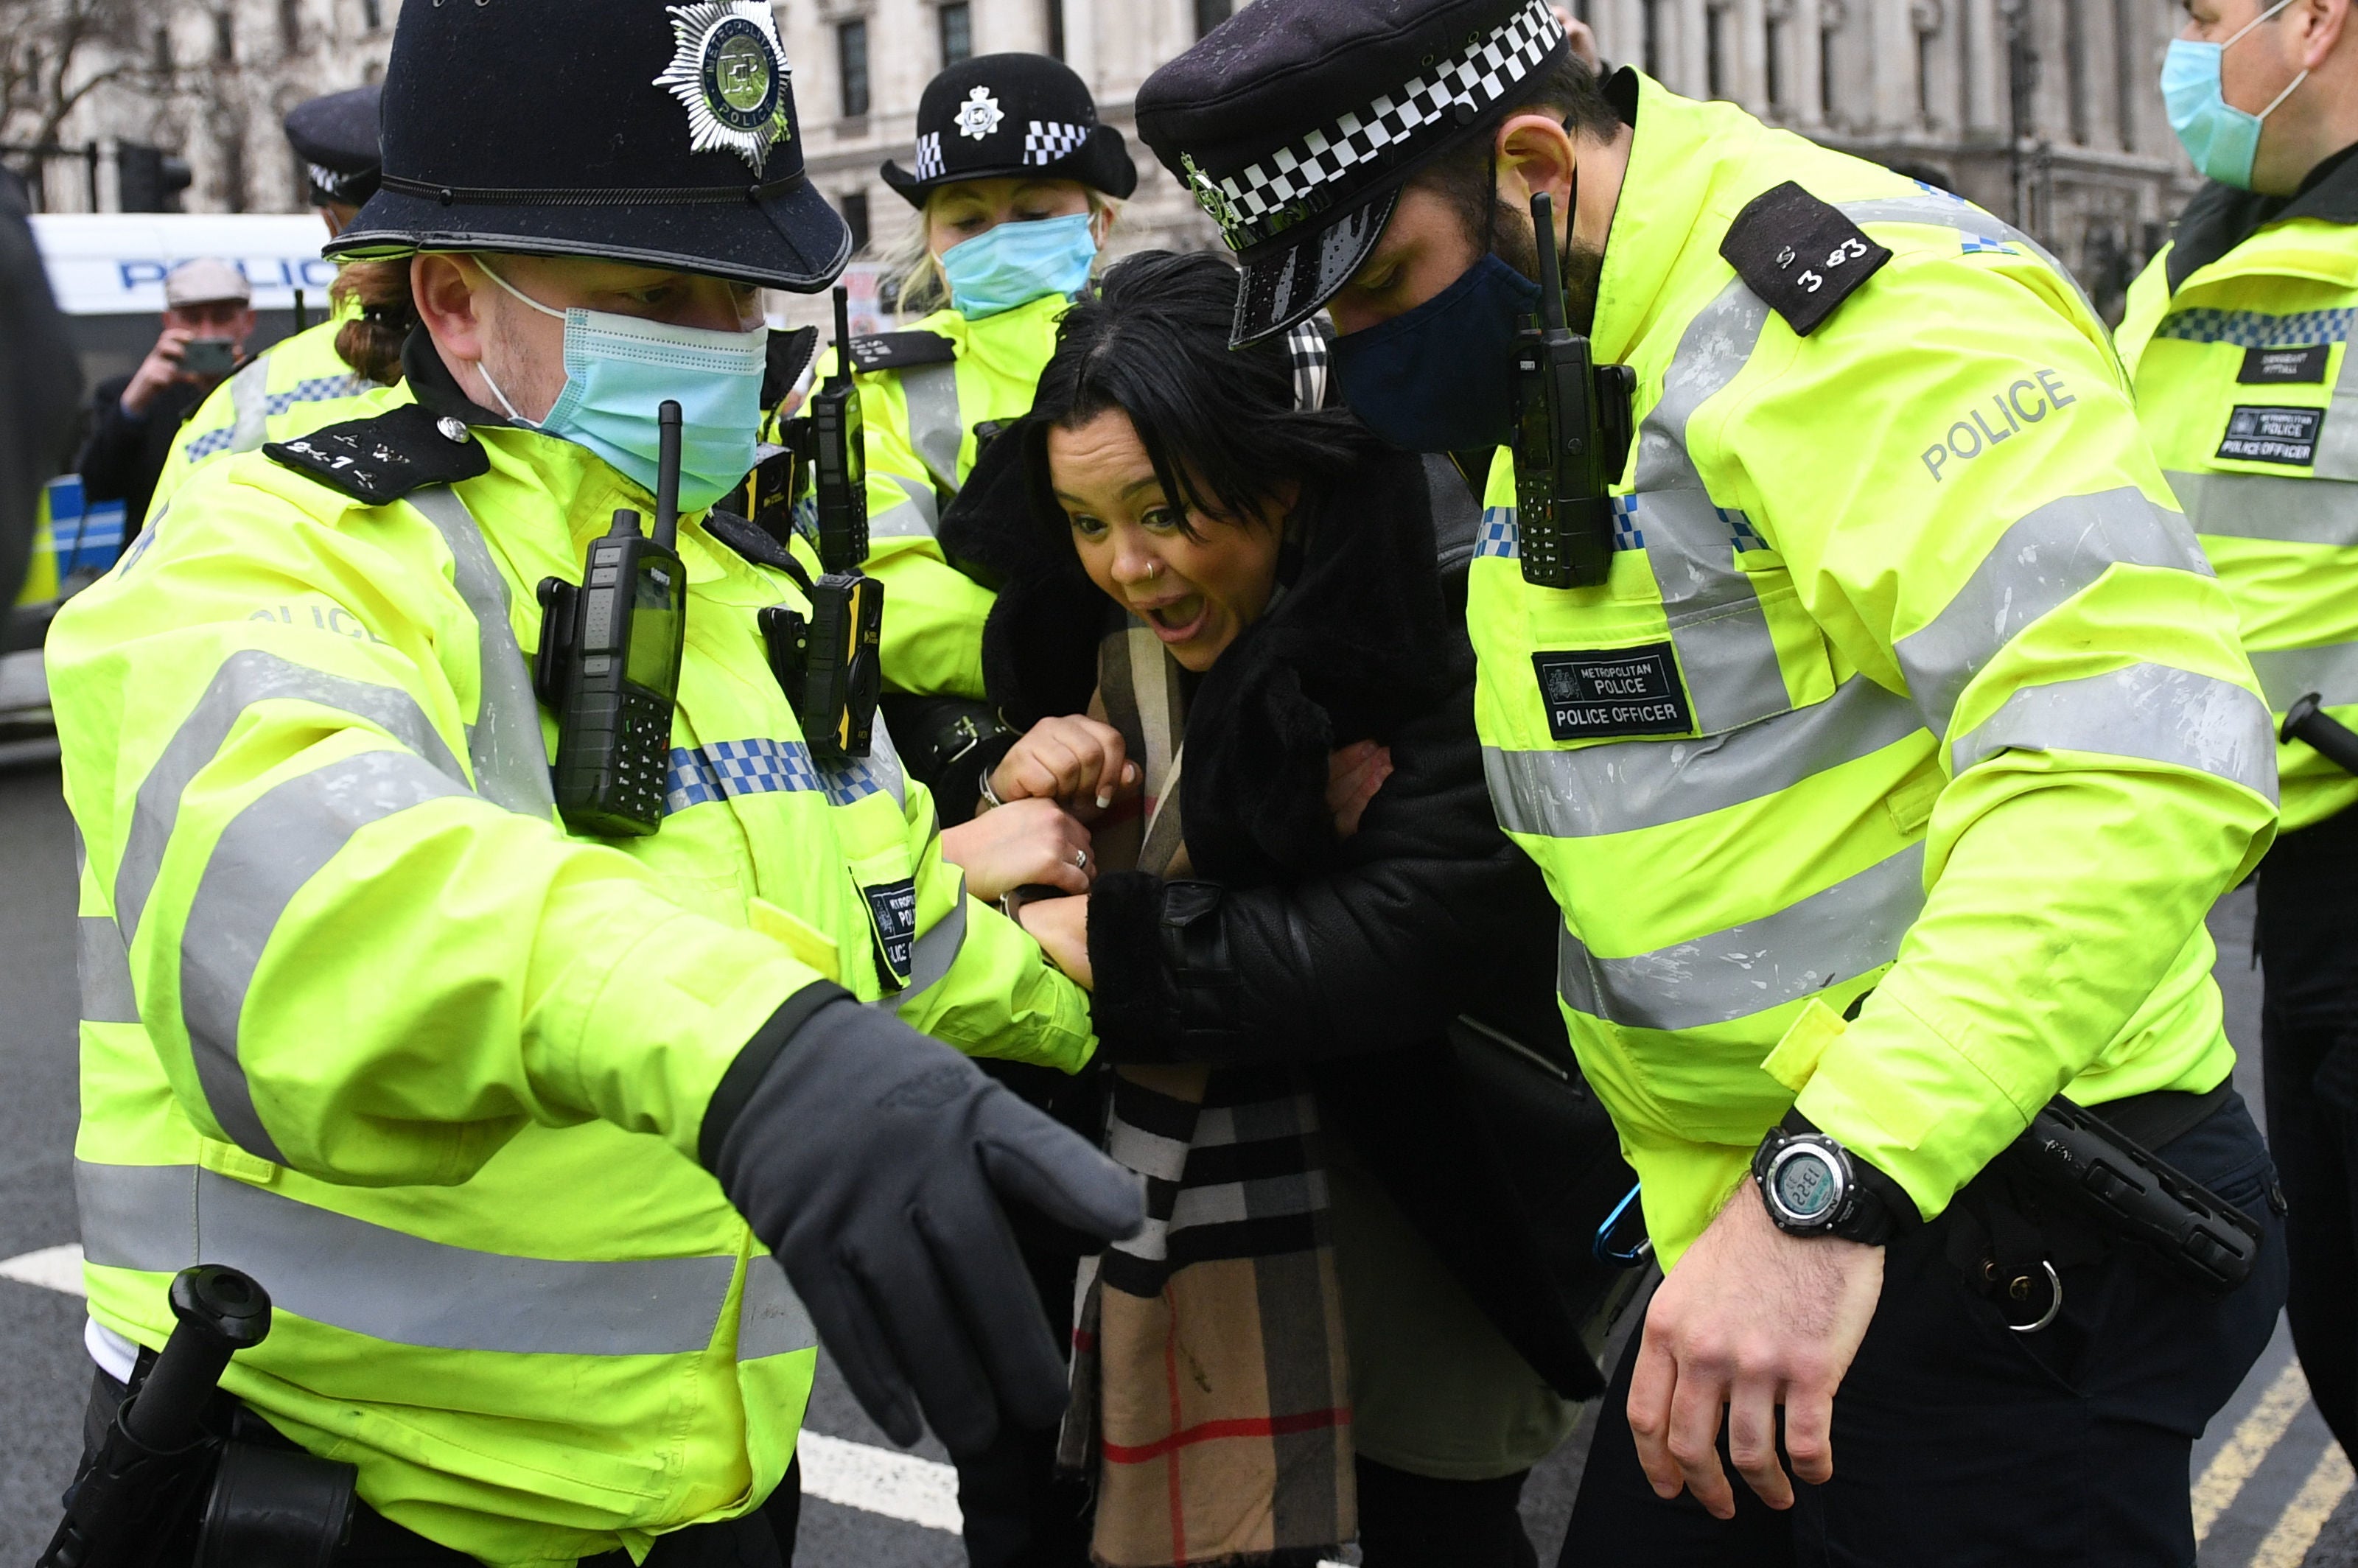 A women is detained for attending an anti-vaccination protest in London during the pandemic on 14 December, 2020.